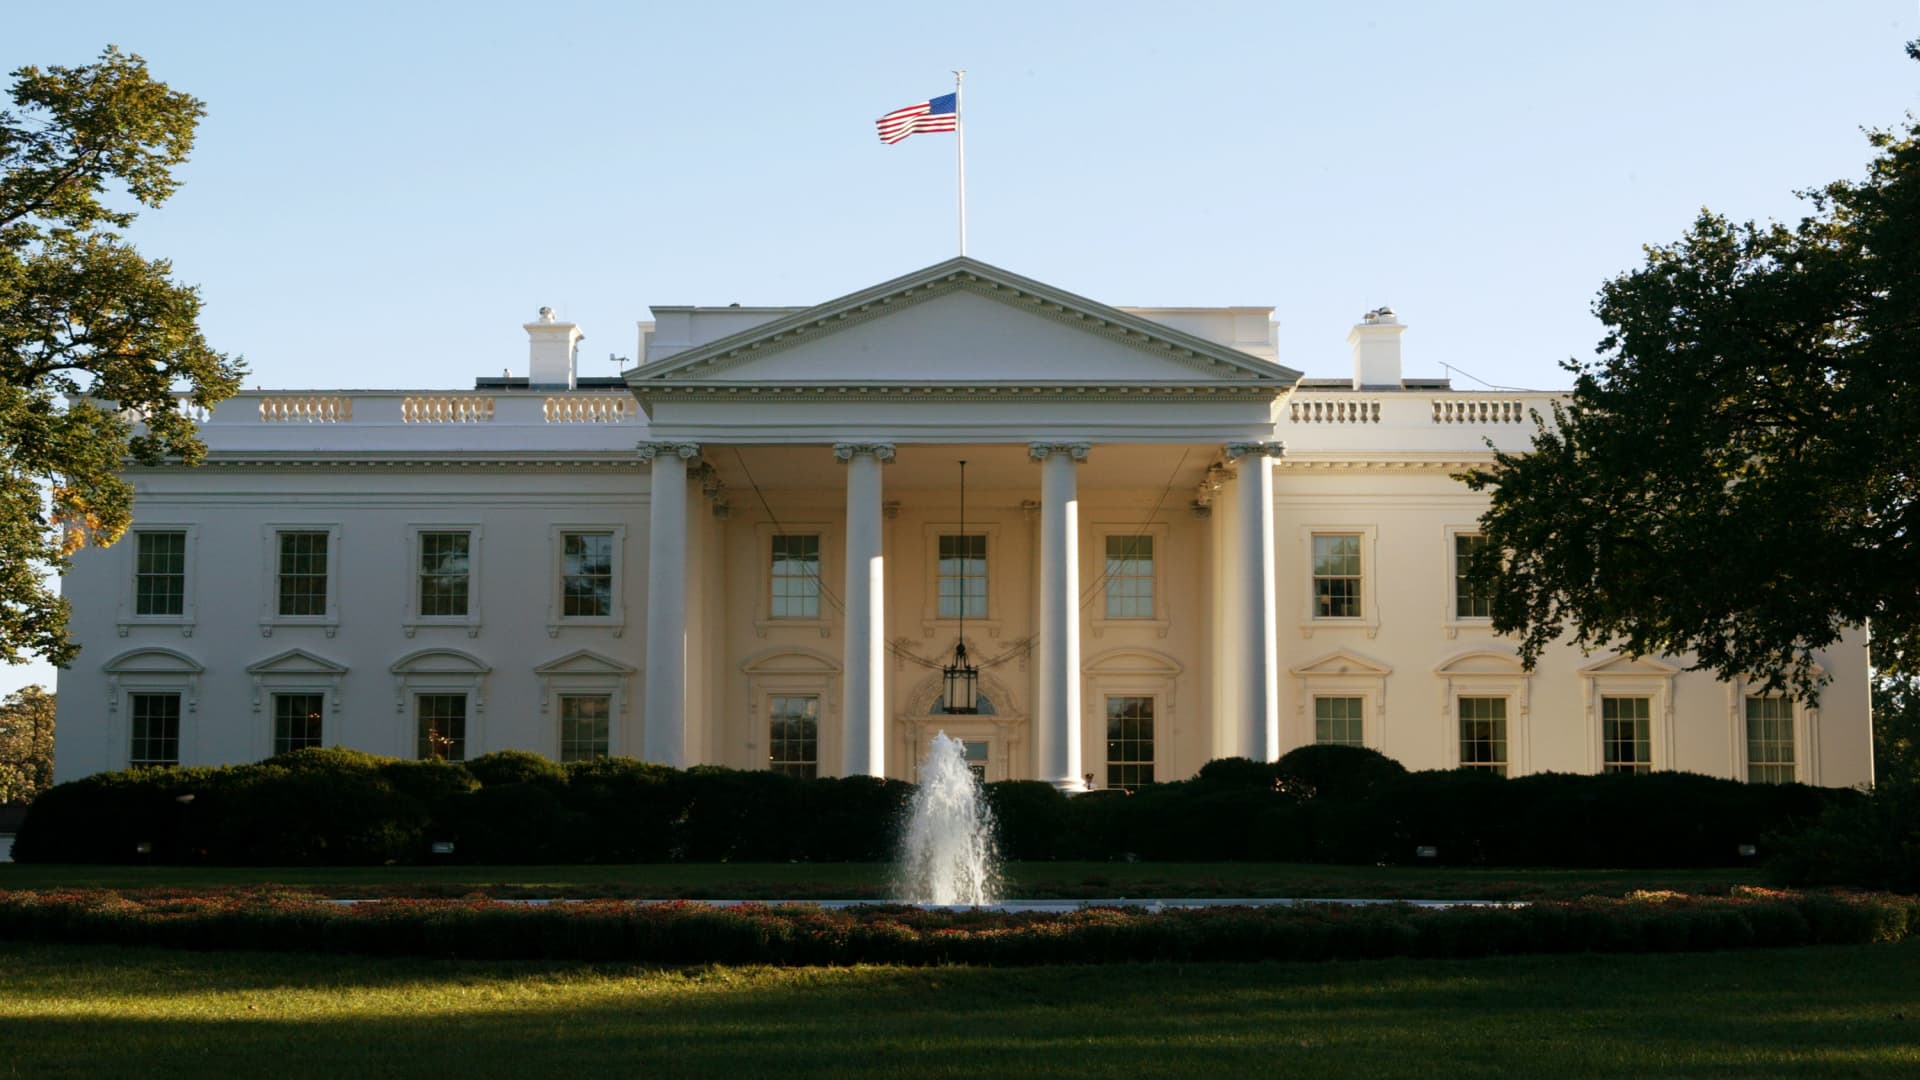 An exterior view of the White House